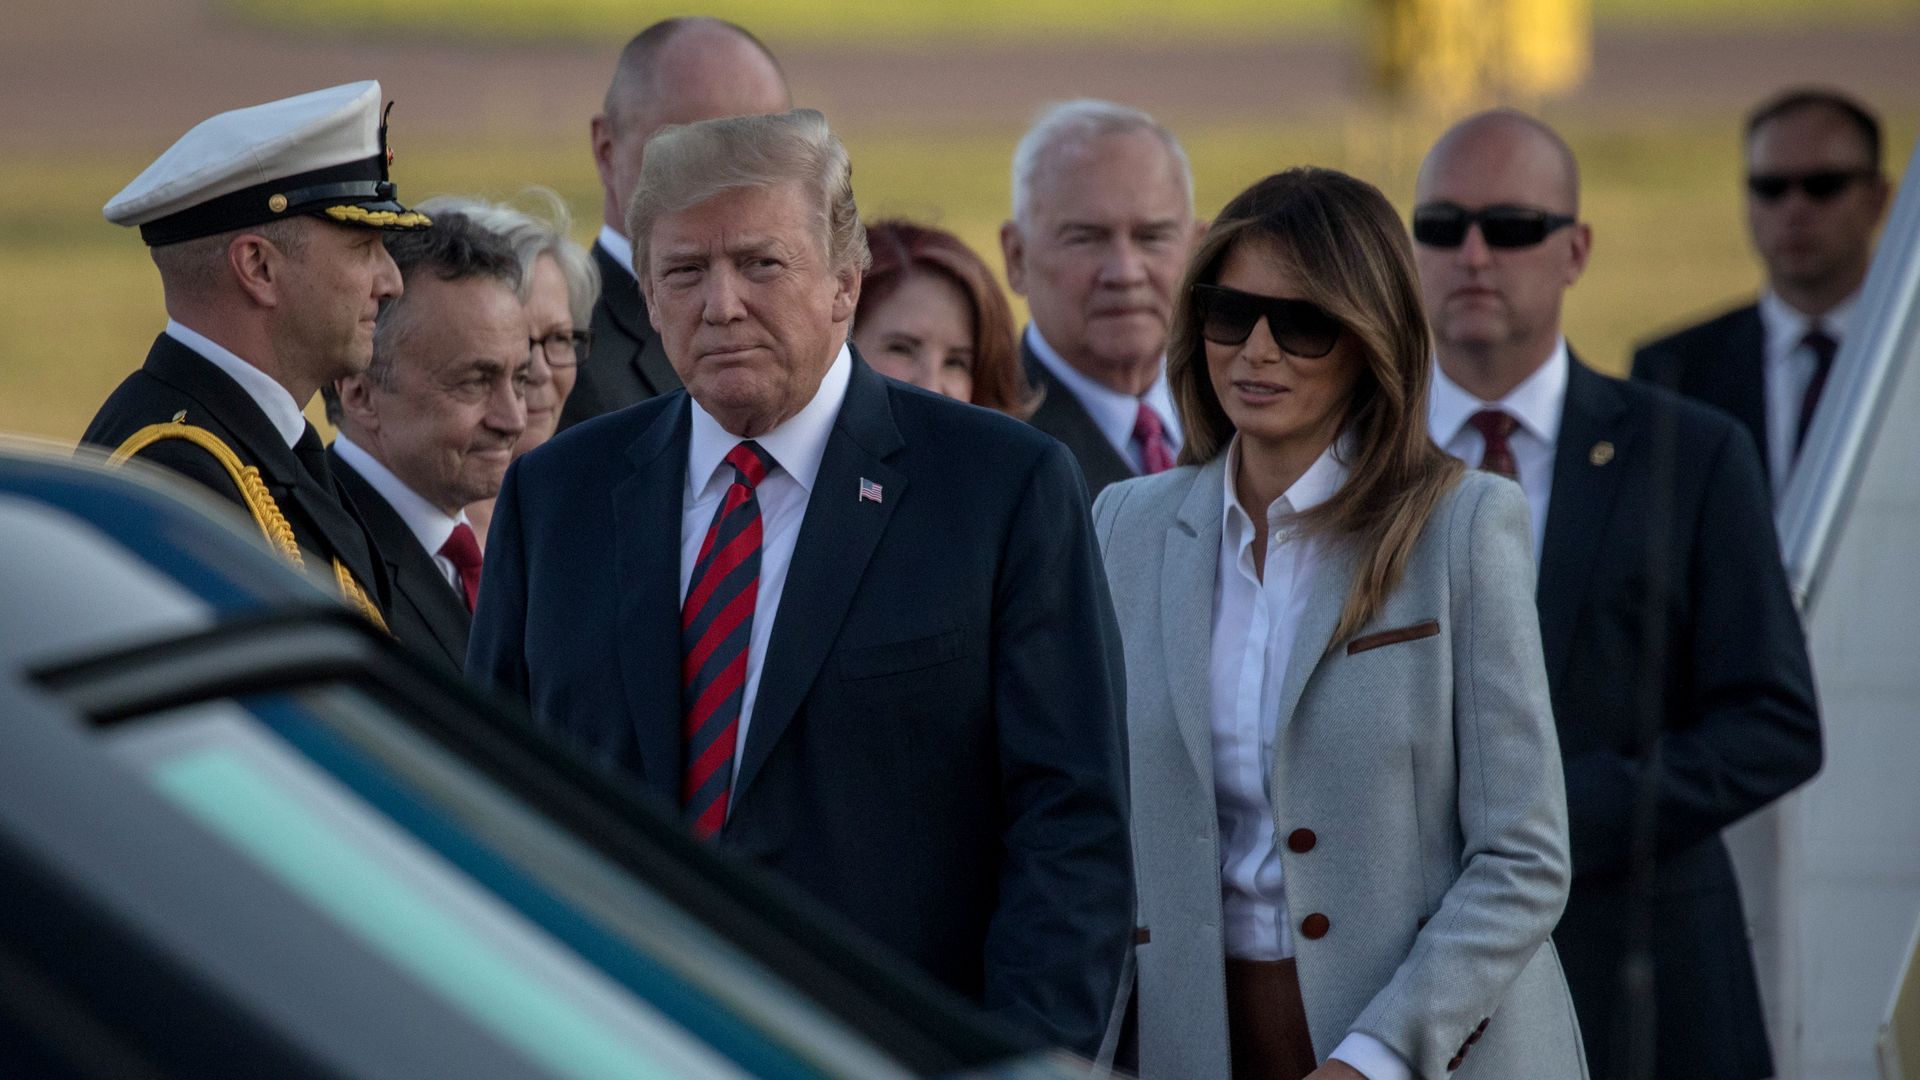 Donald Trump gets off Air Force One with Melania